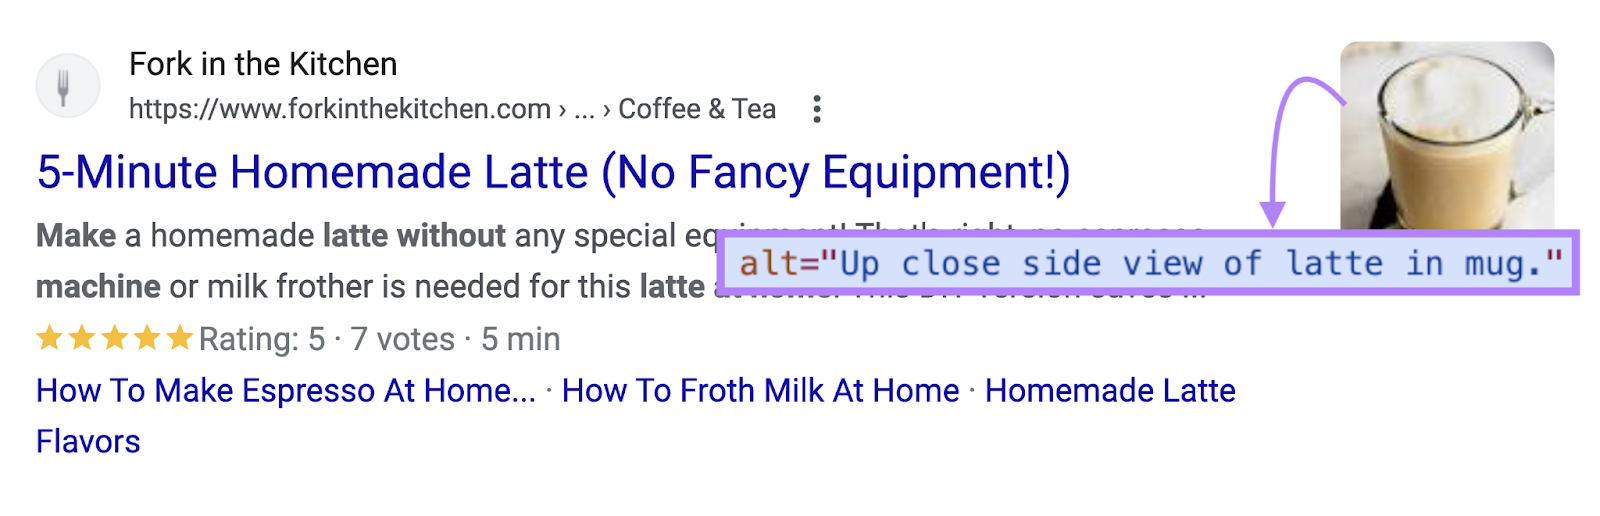 alt text that reads "Up close side view of latte in mug."